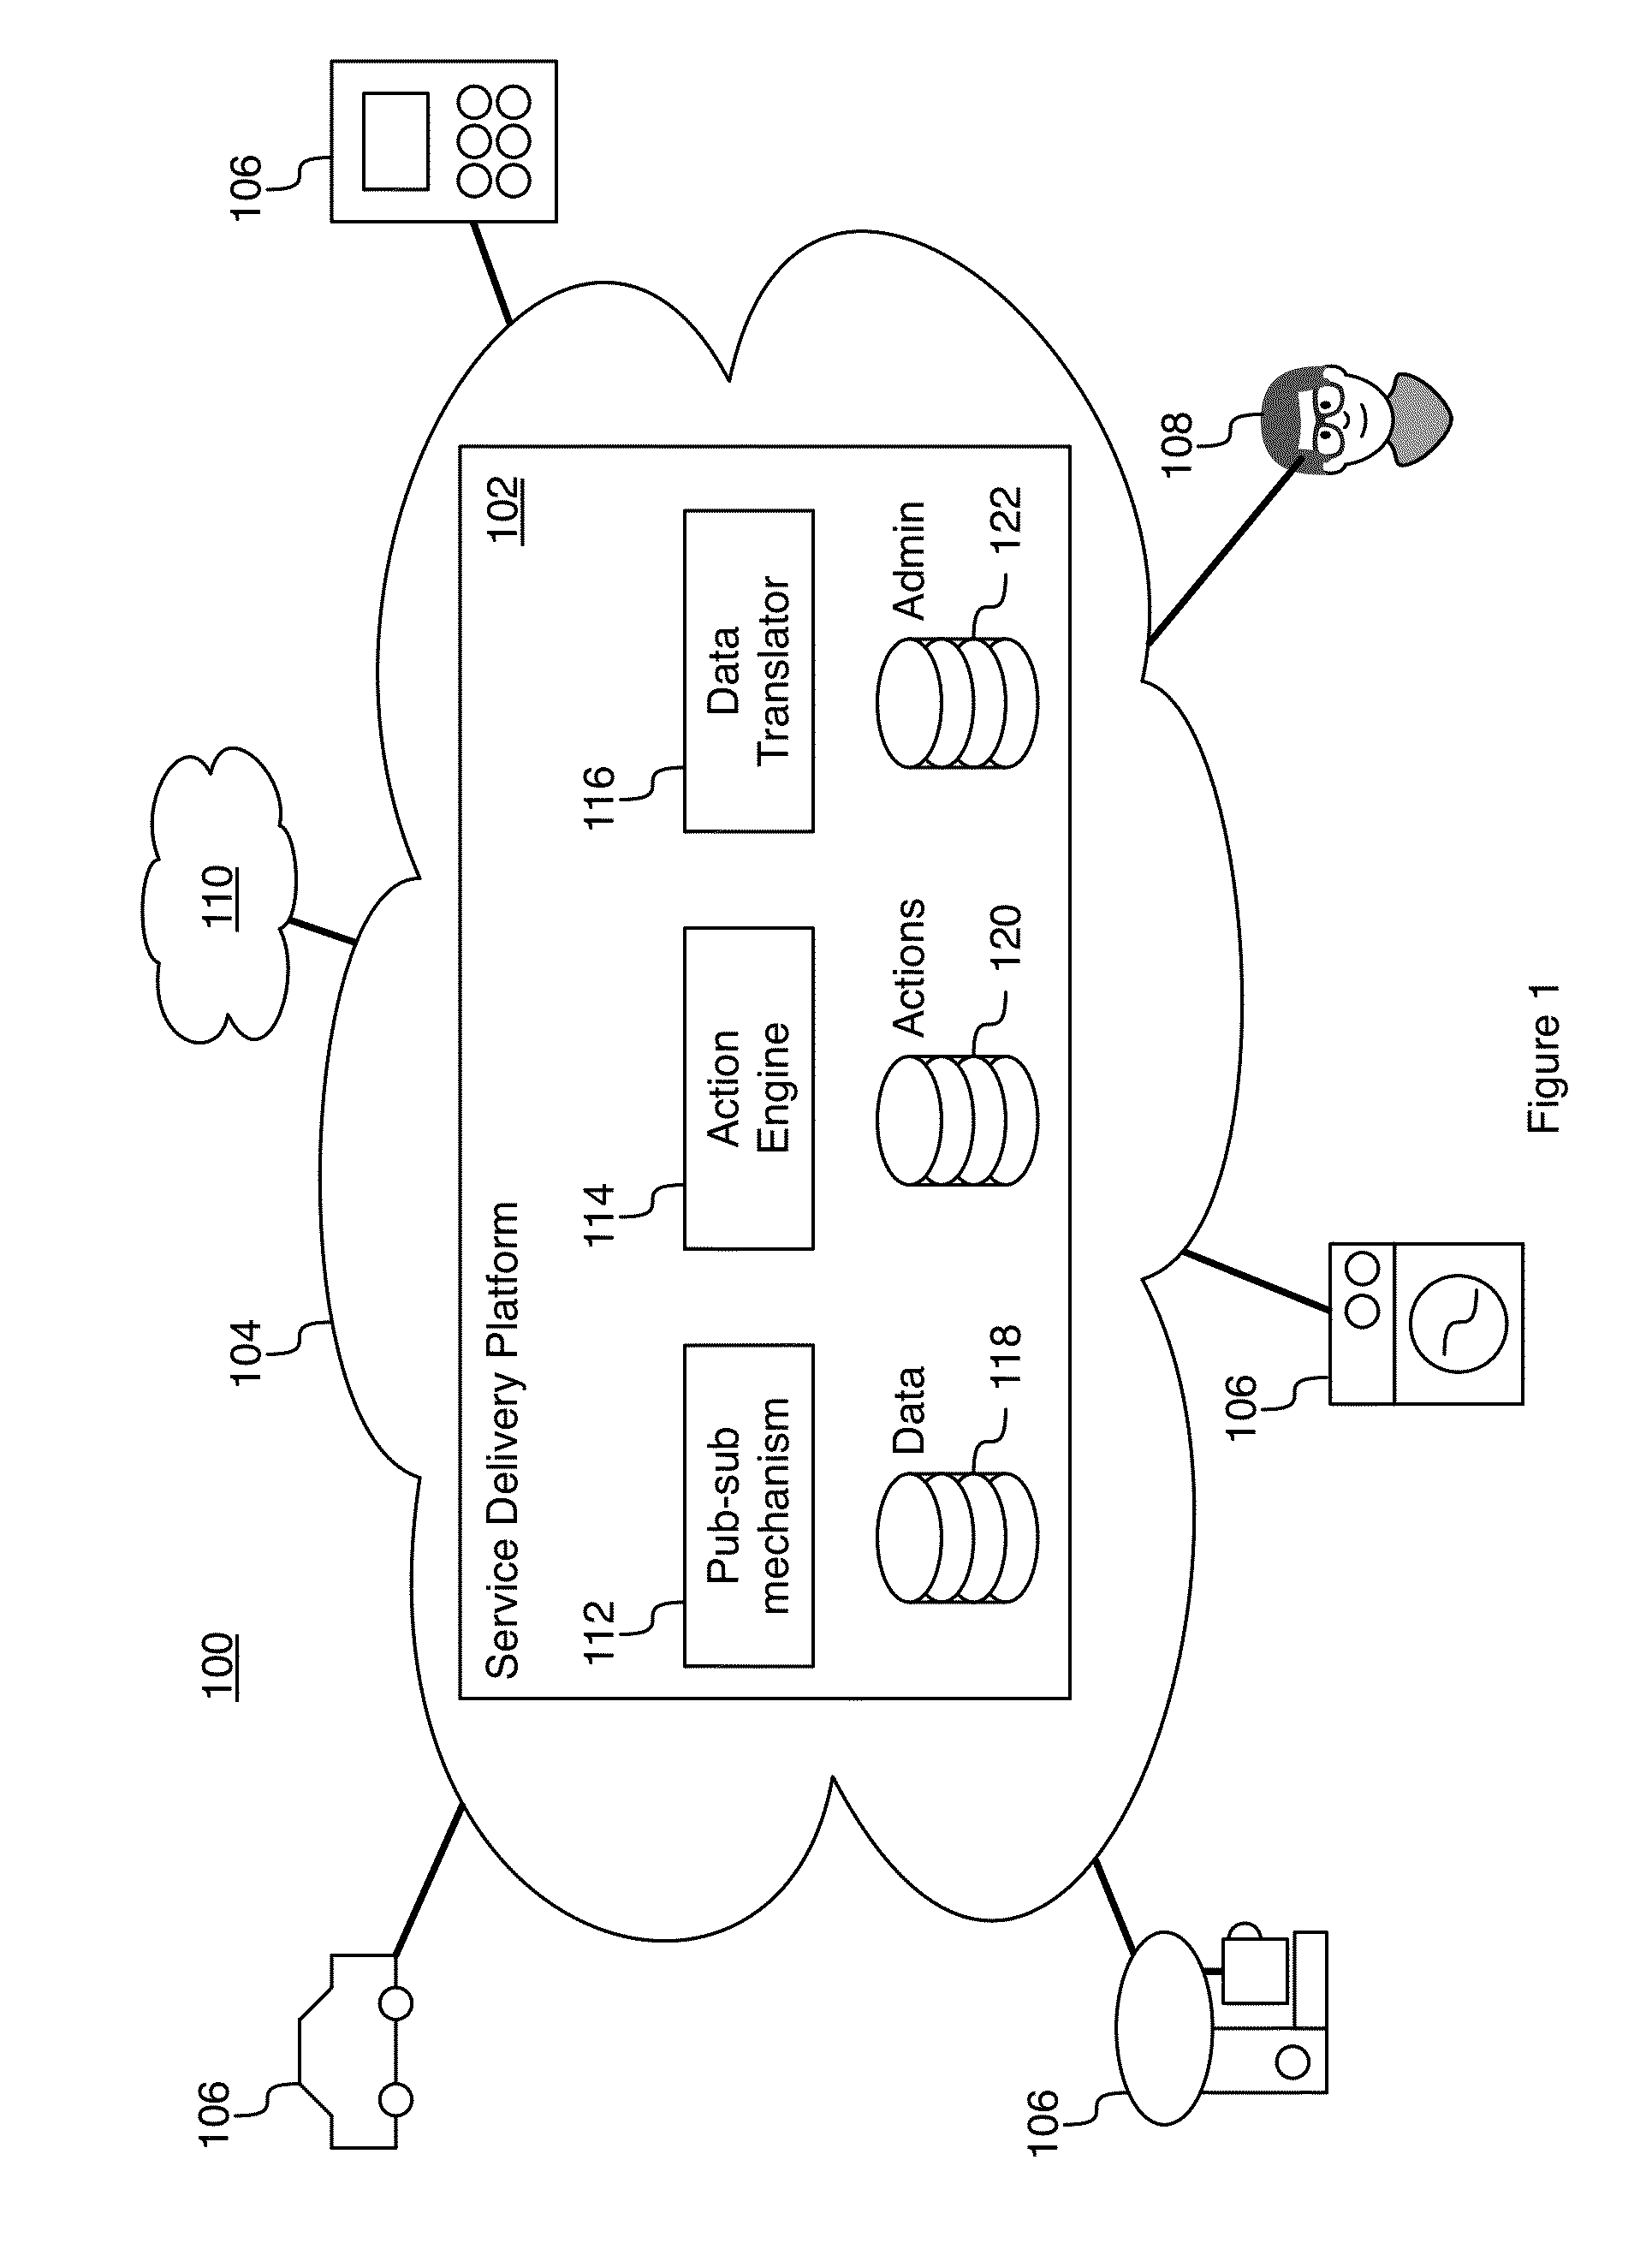 System and method for machine-to-machine communication